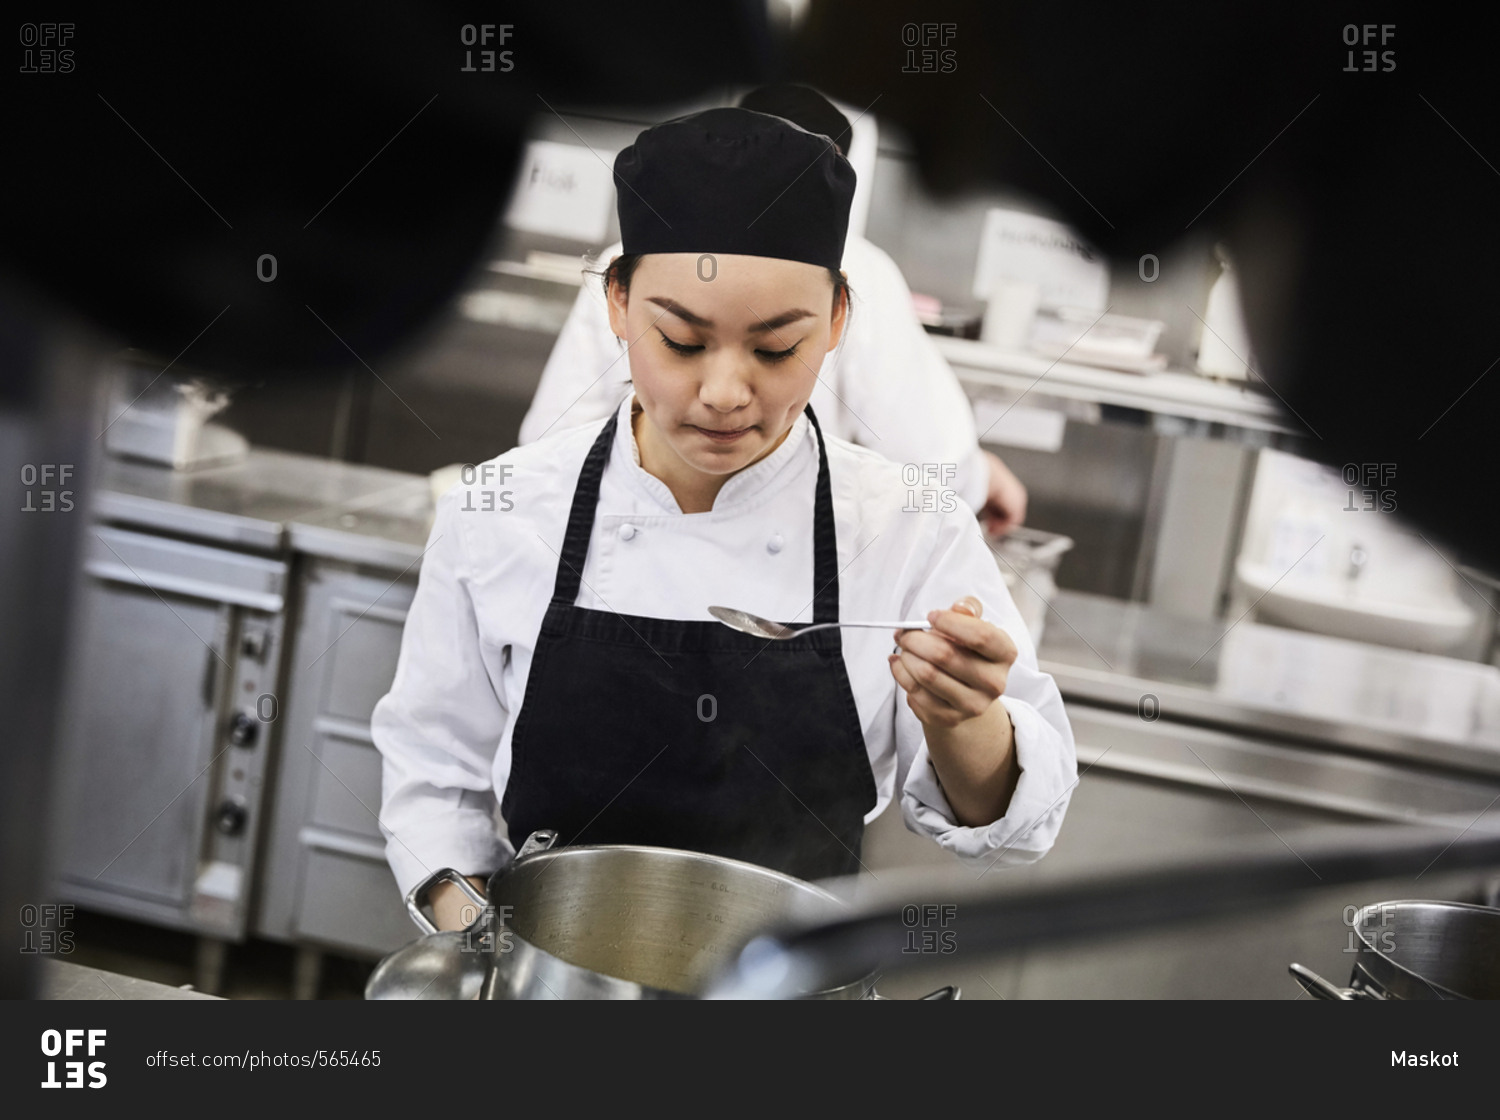 Young female chef tasting food from cooking pan at commercial kitchen